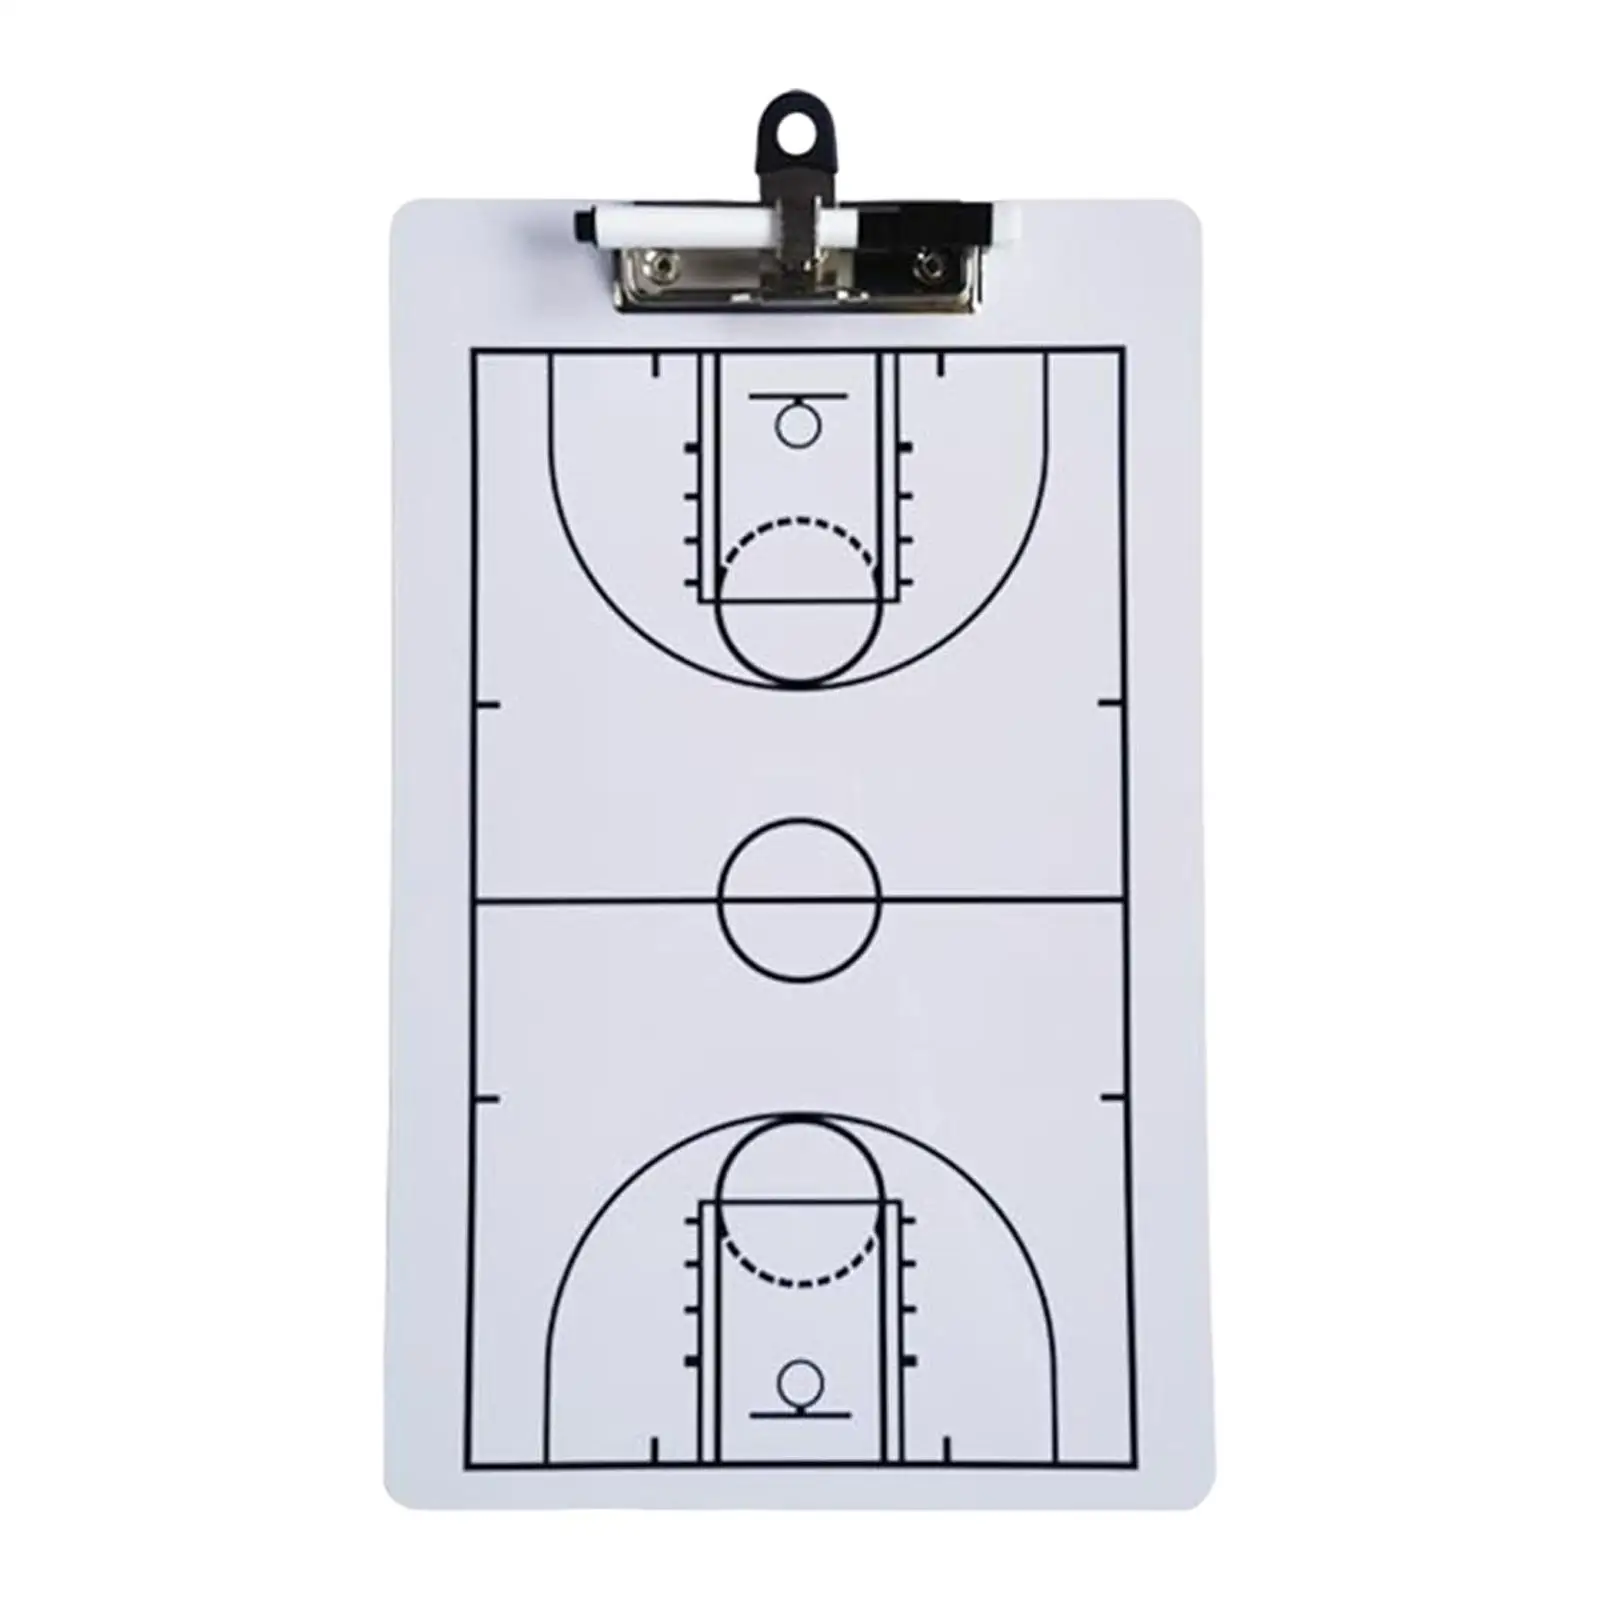 Double Sided Basketball Clipboard Strategy Tactic Board, Game Plan Demonstration Referees Gear Basketball Coaching Board